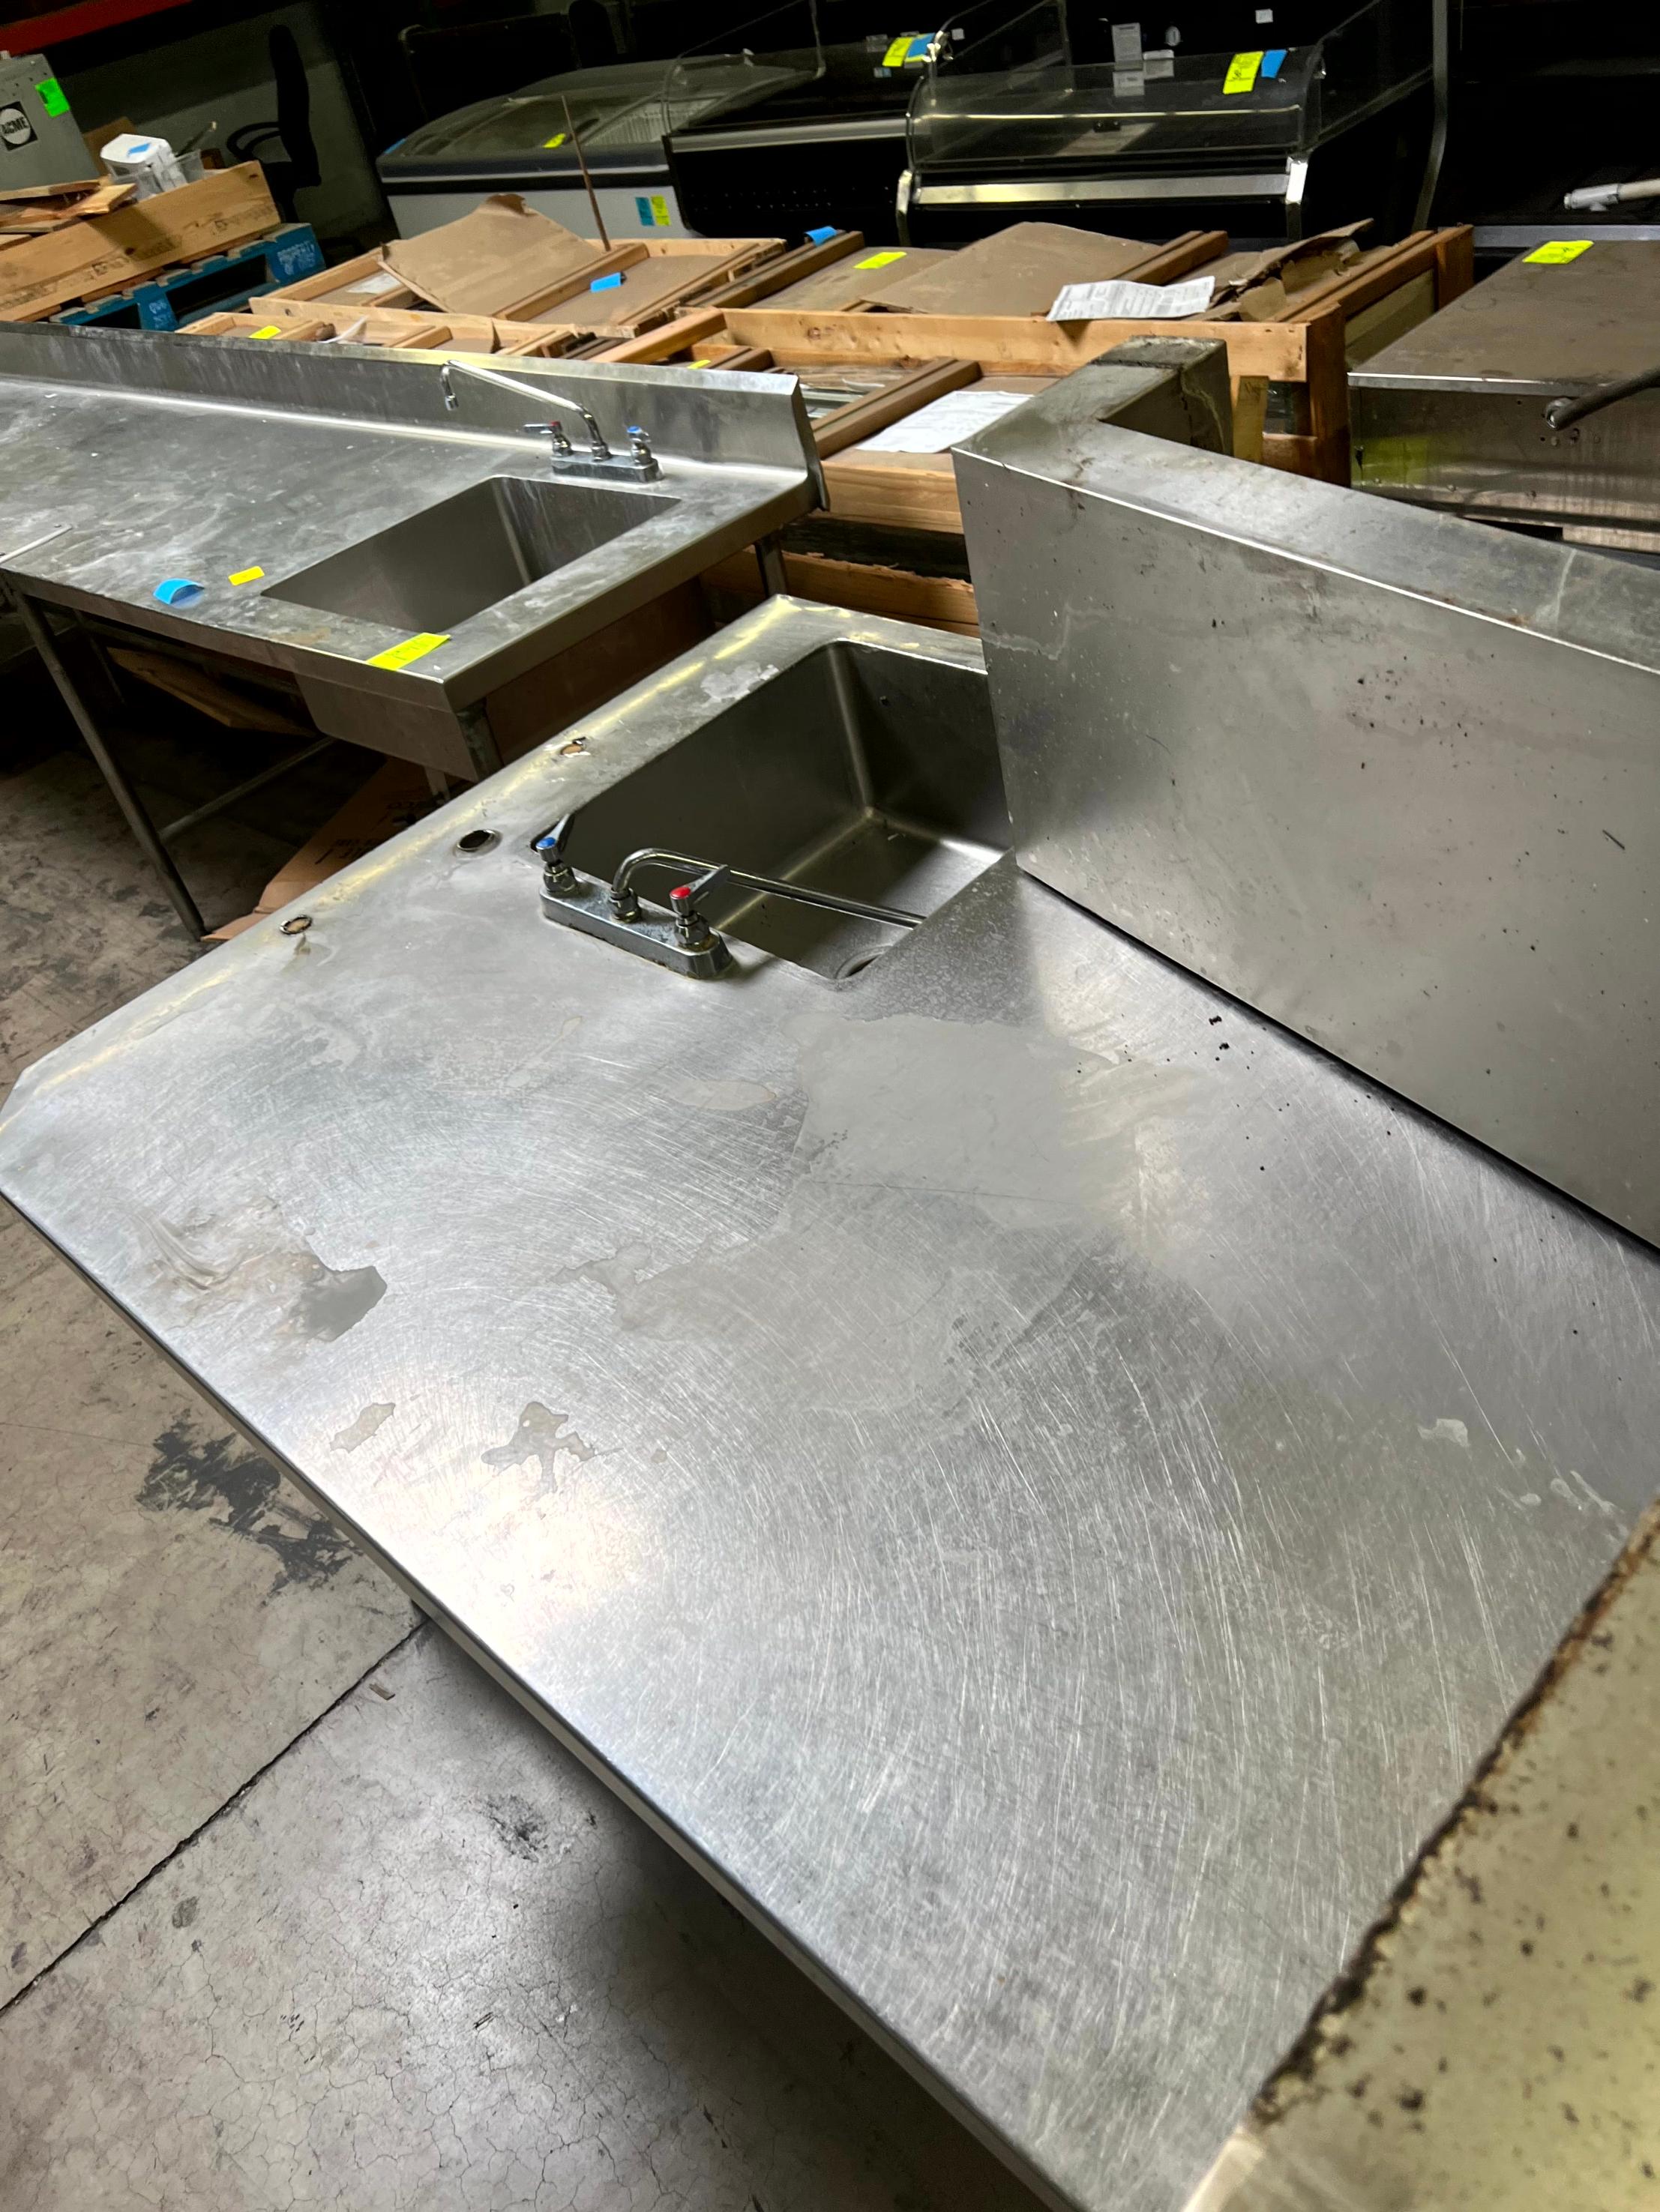 Stainless Steel Work Table Station w/ Basins